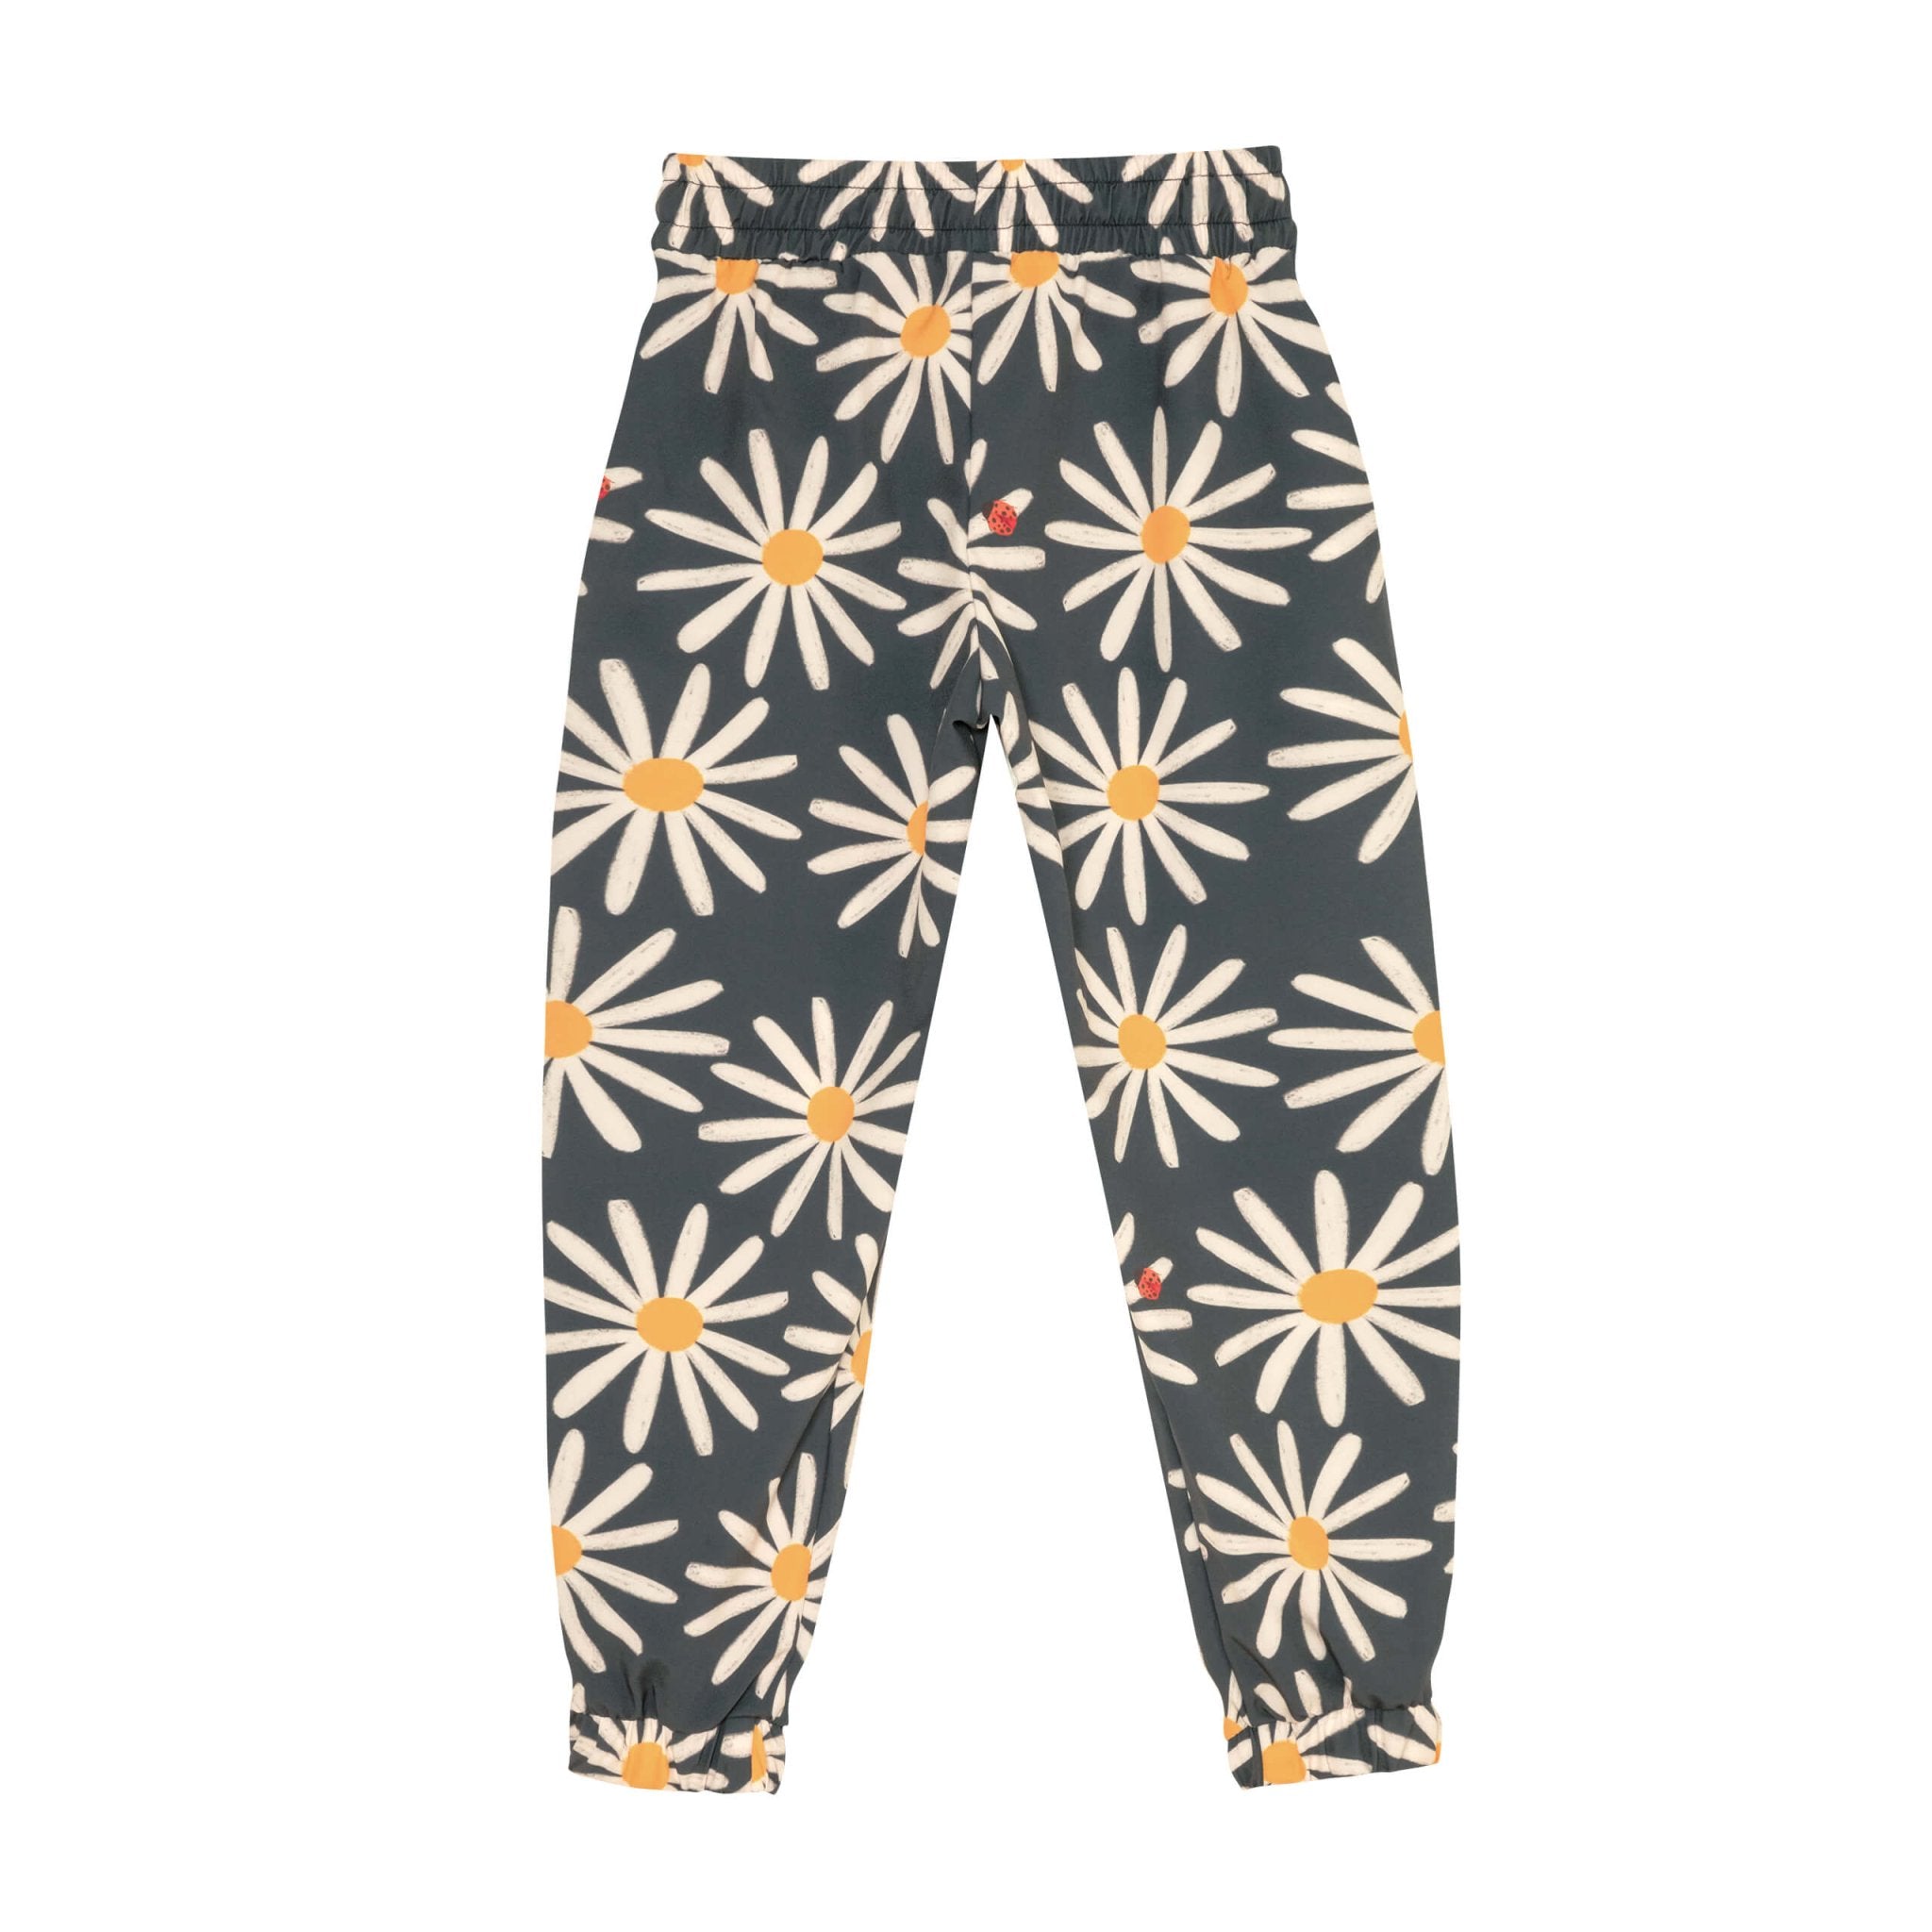 Back of adorable grey sunflower printed pants for girls. It has a drawstring waist and cinched legs. Also ittle ladybug details. The pants are shown over a white background.